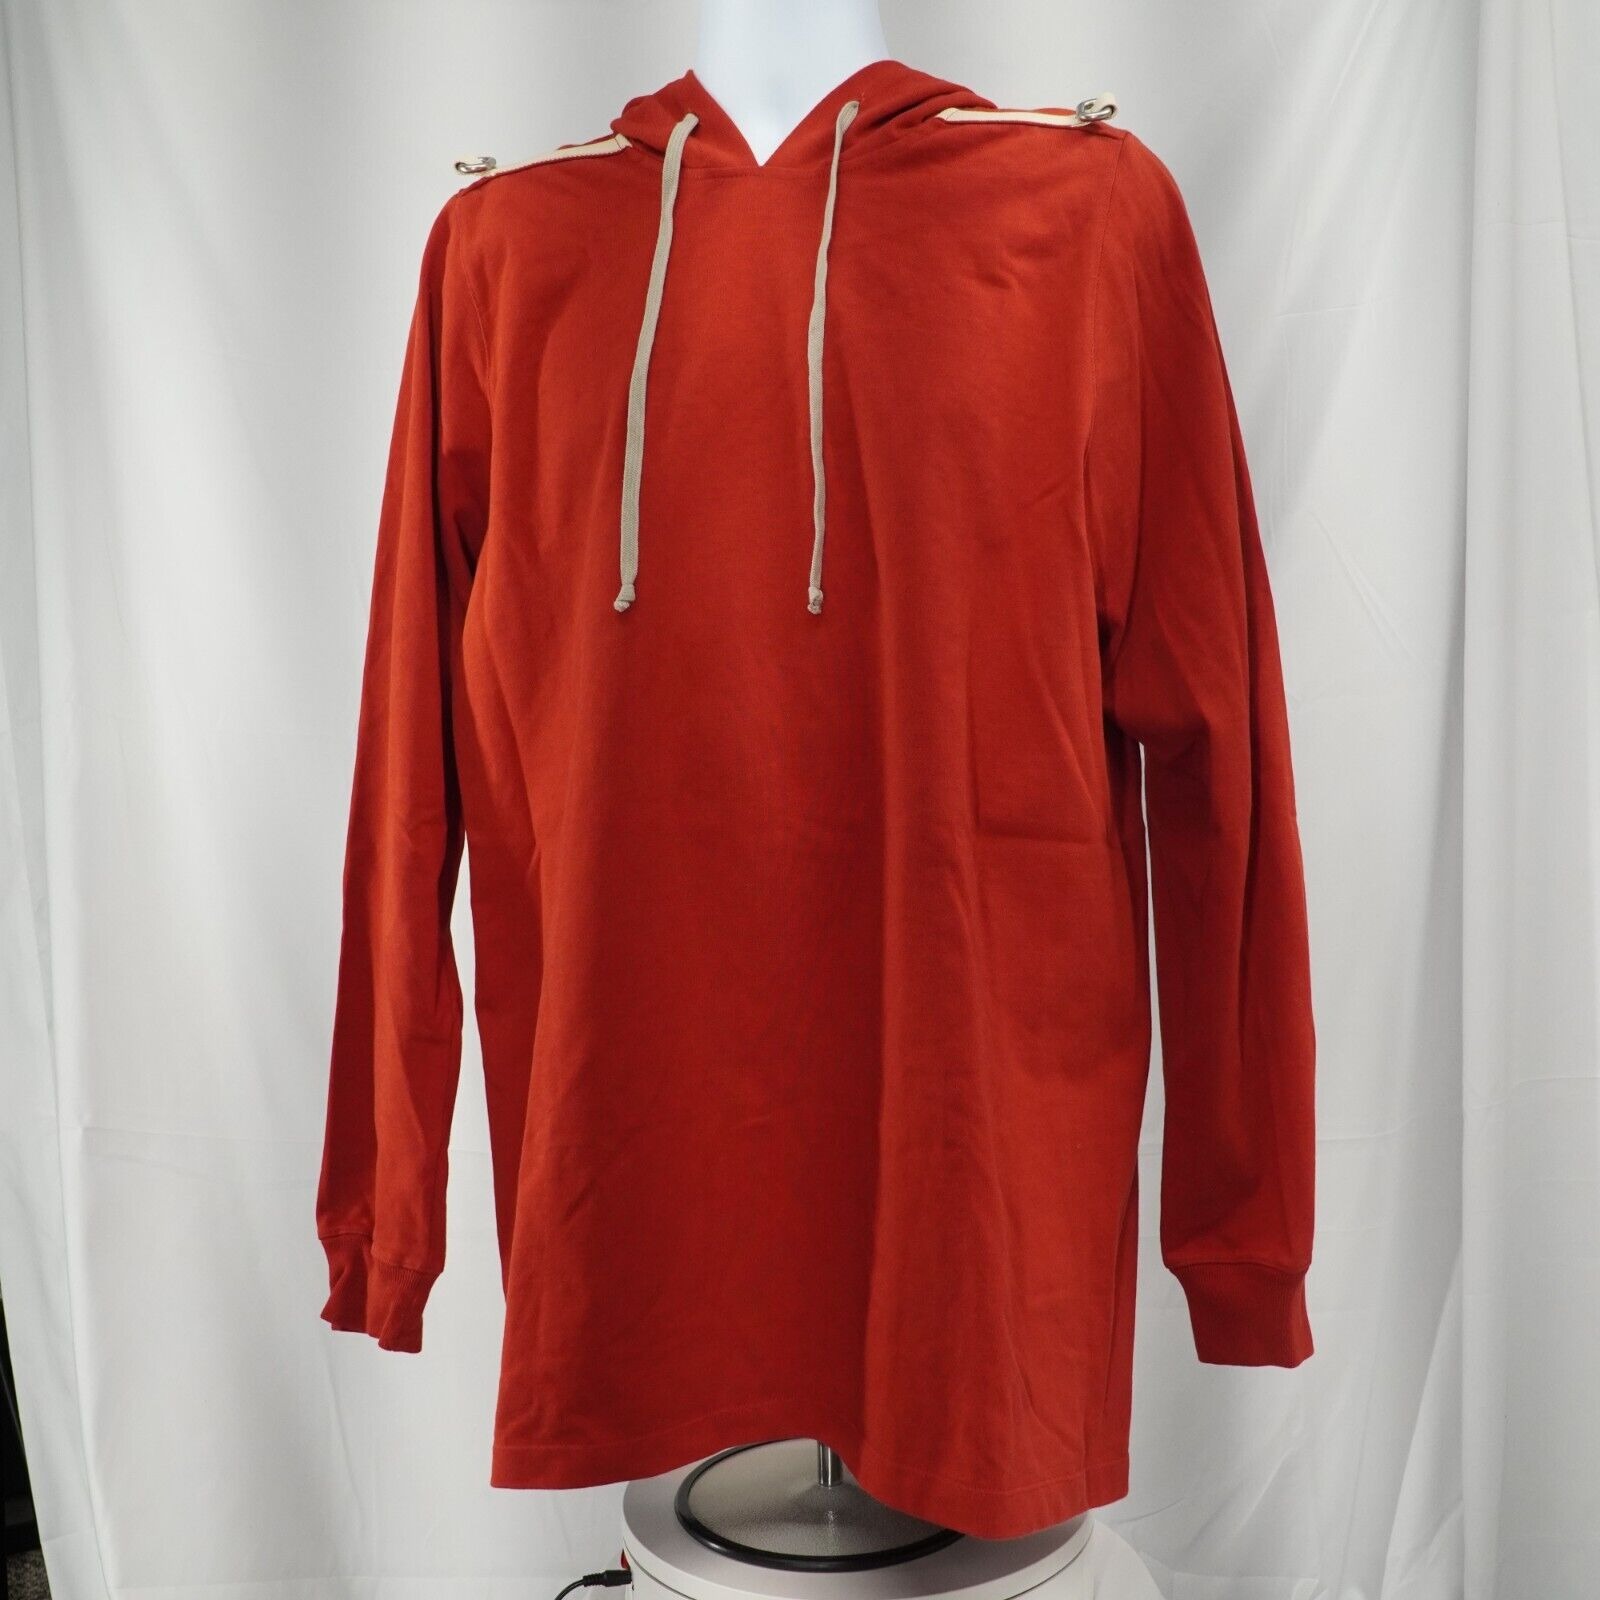 Knit Hoodie Sweater Longline Cardinal Red Natural D Rings - 4